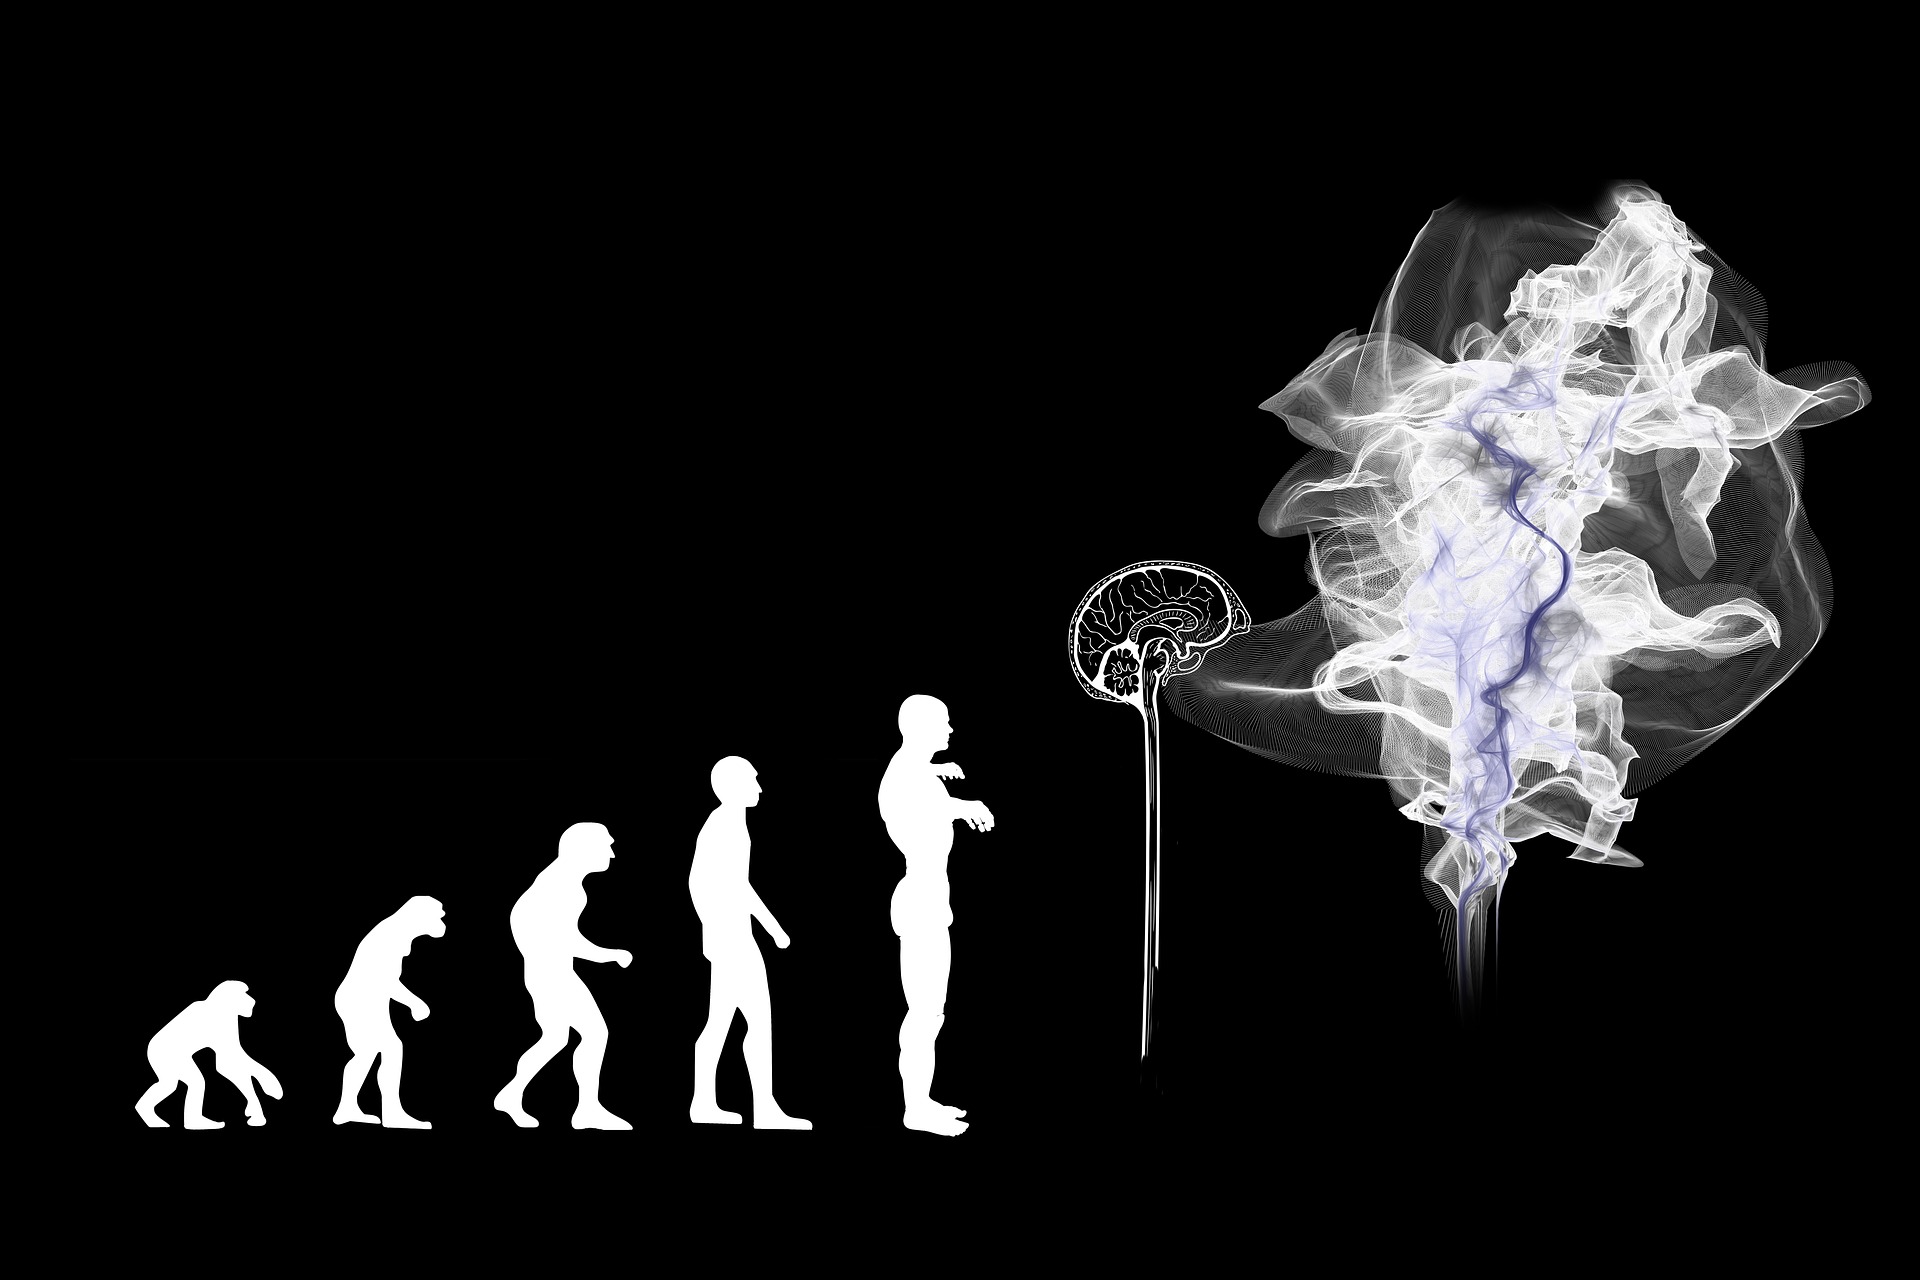 the evolution of man, finishing with a smoking brain